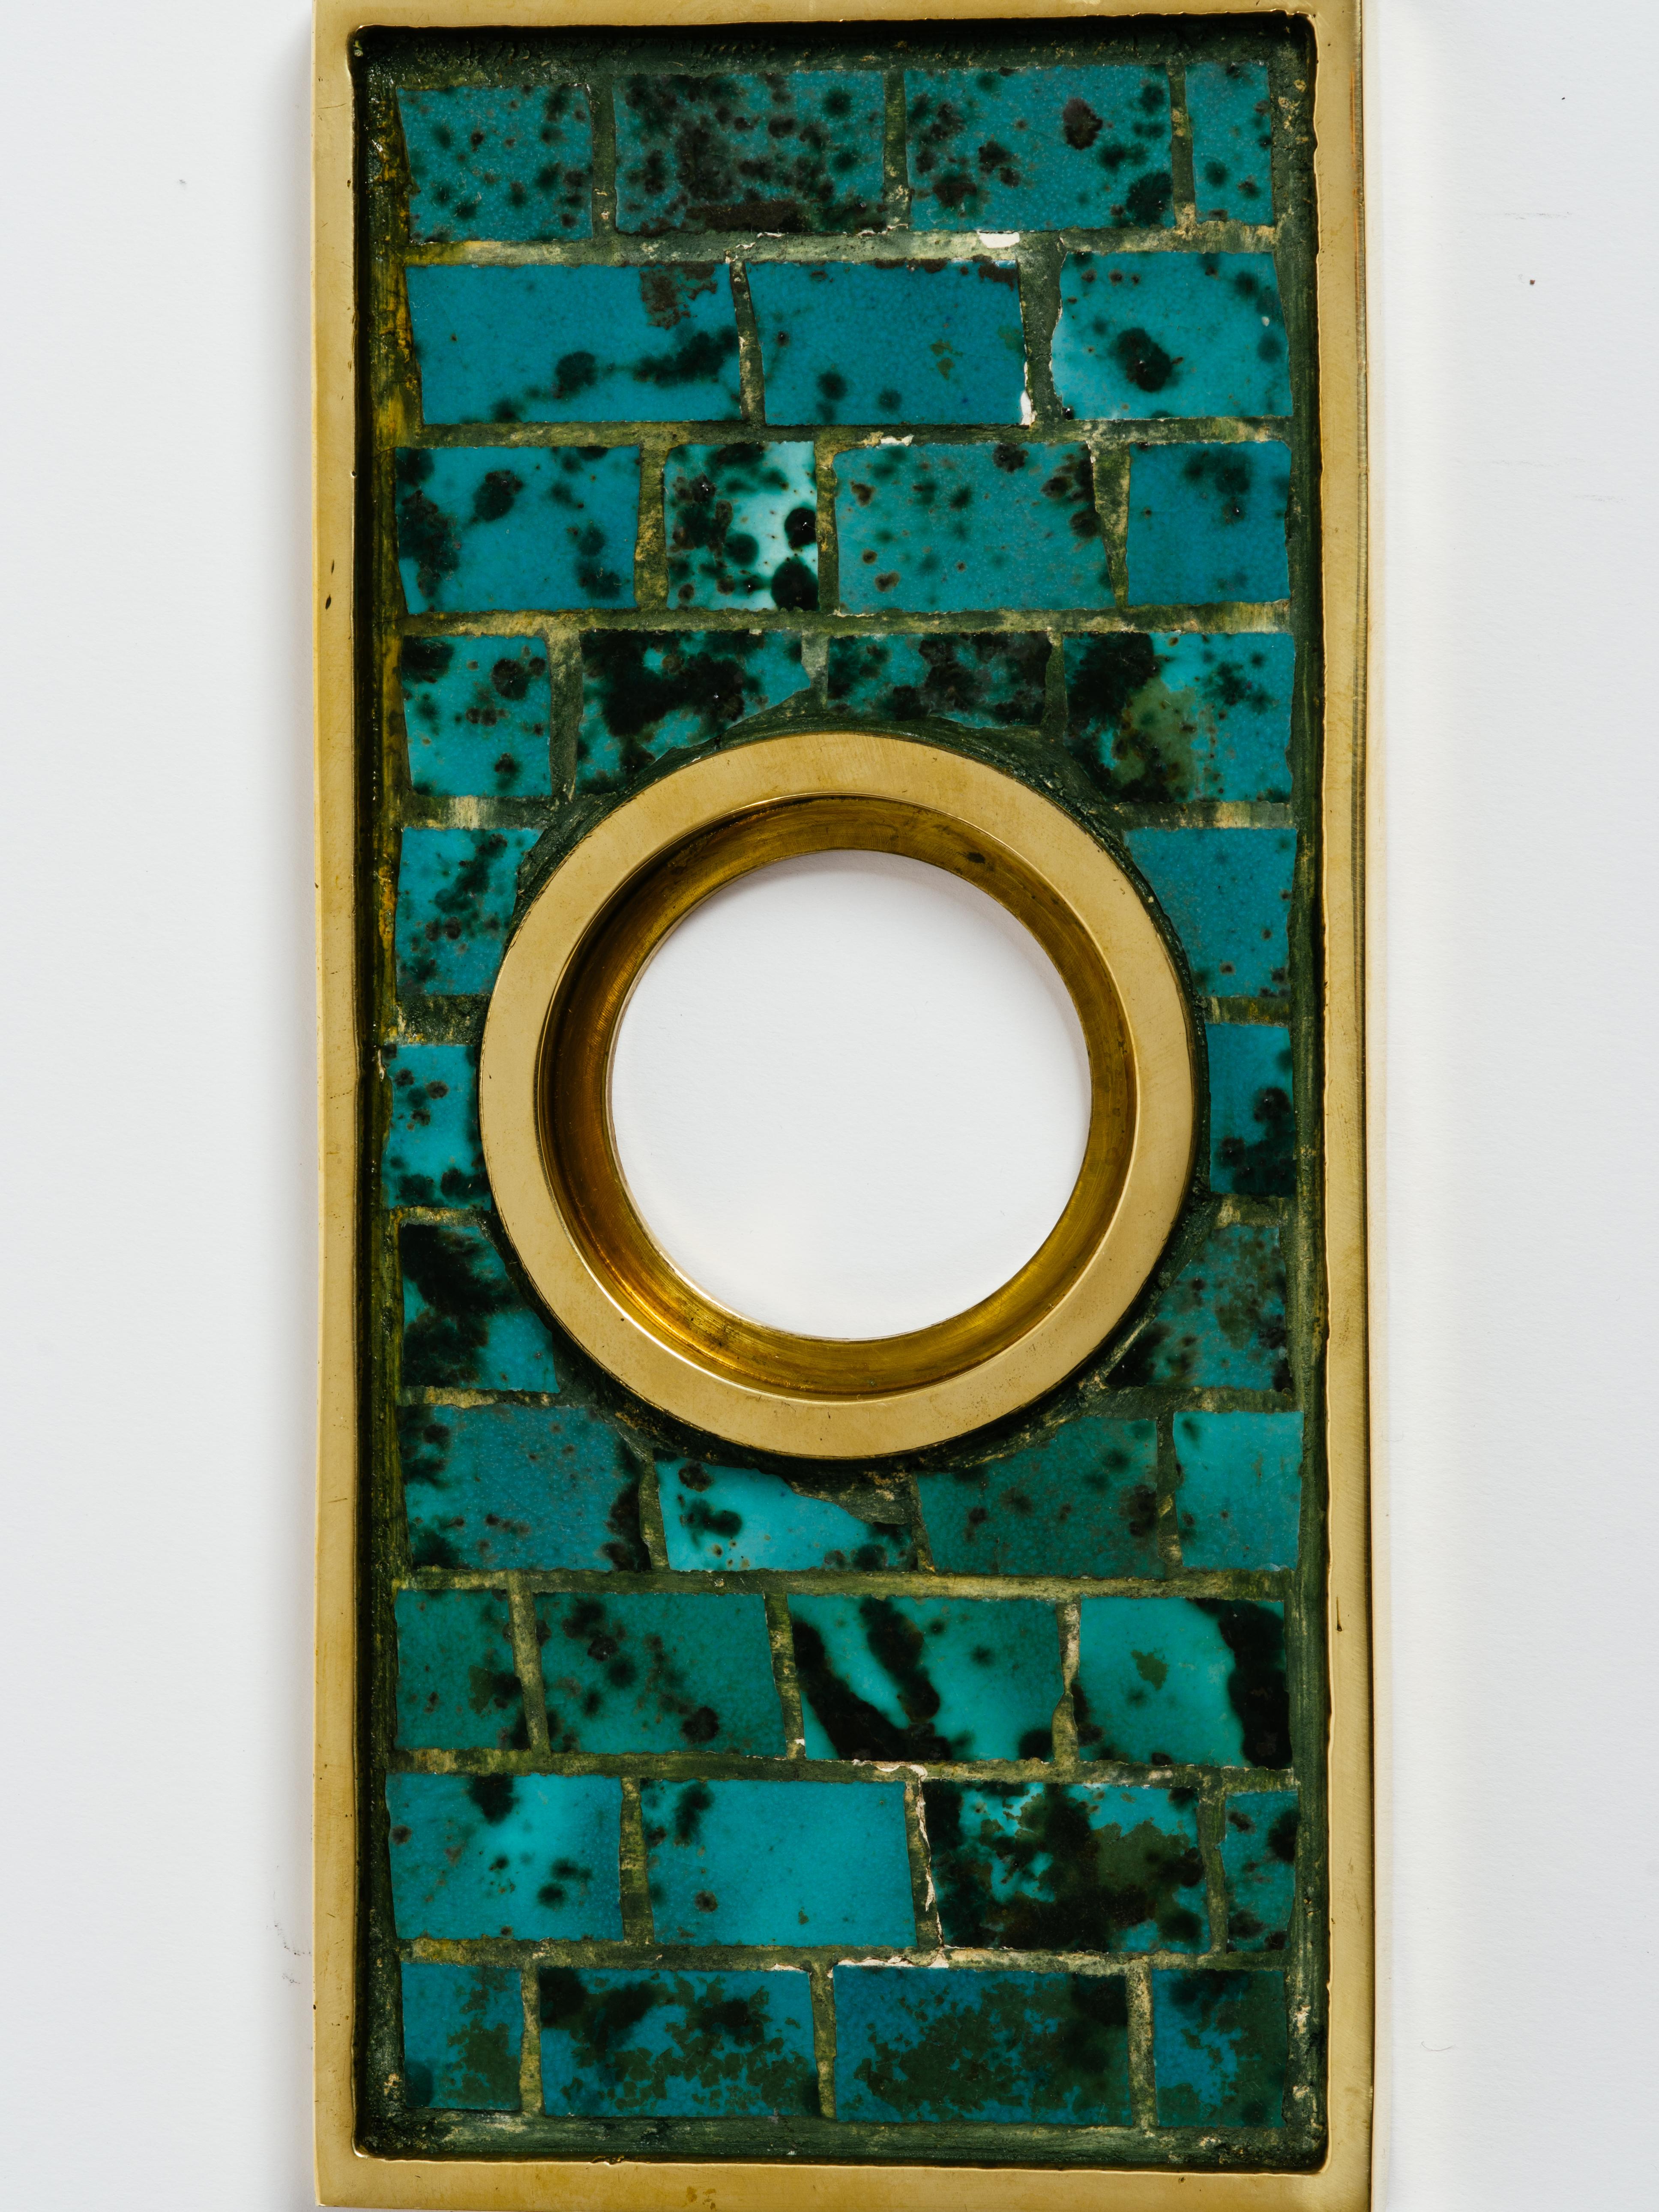 Large Mexican brass door escutcheon / plate with stone tile inlay, circa 1970s.
Attributed to Pepe Mendoza. Stamped MEXICO on back.